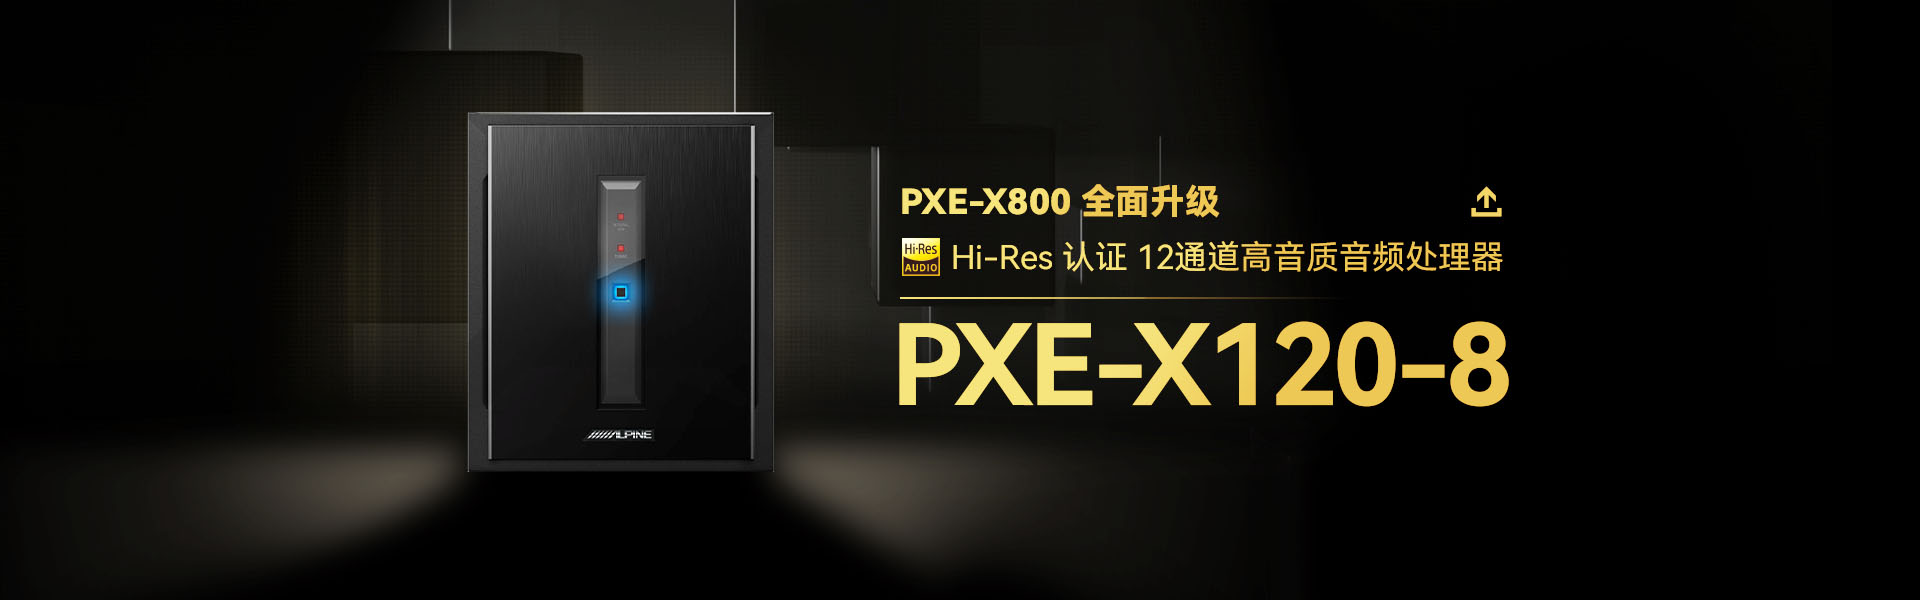 PXE-X120-8